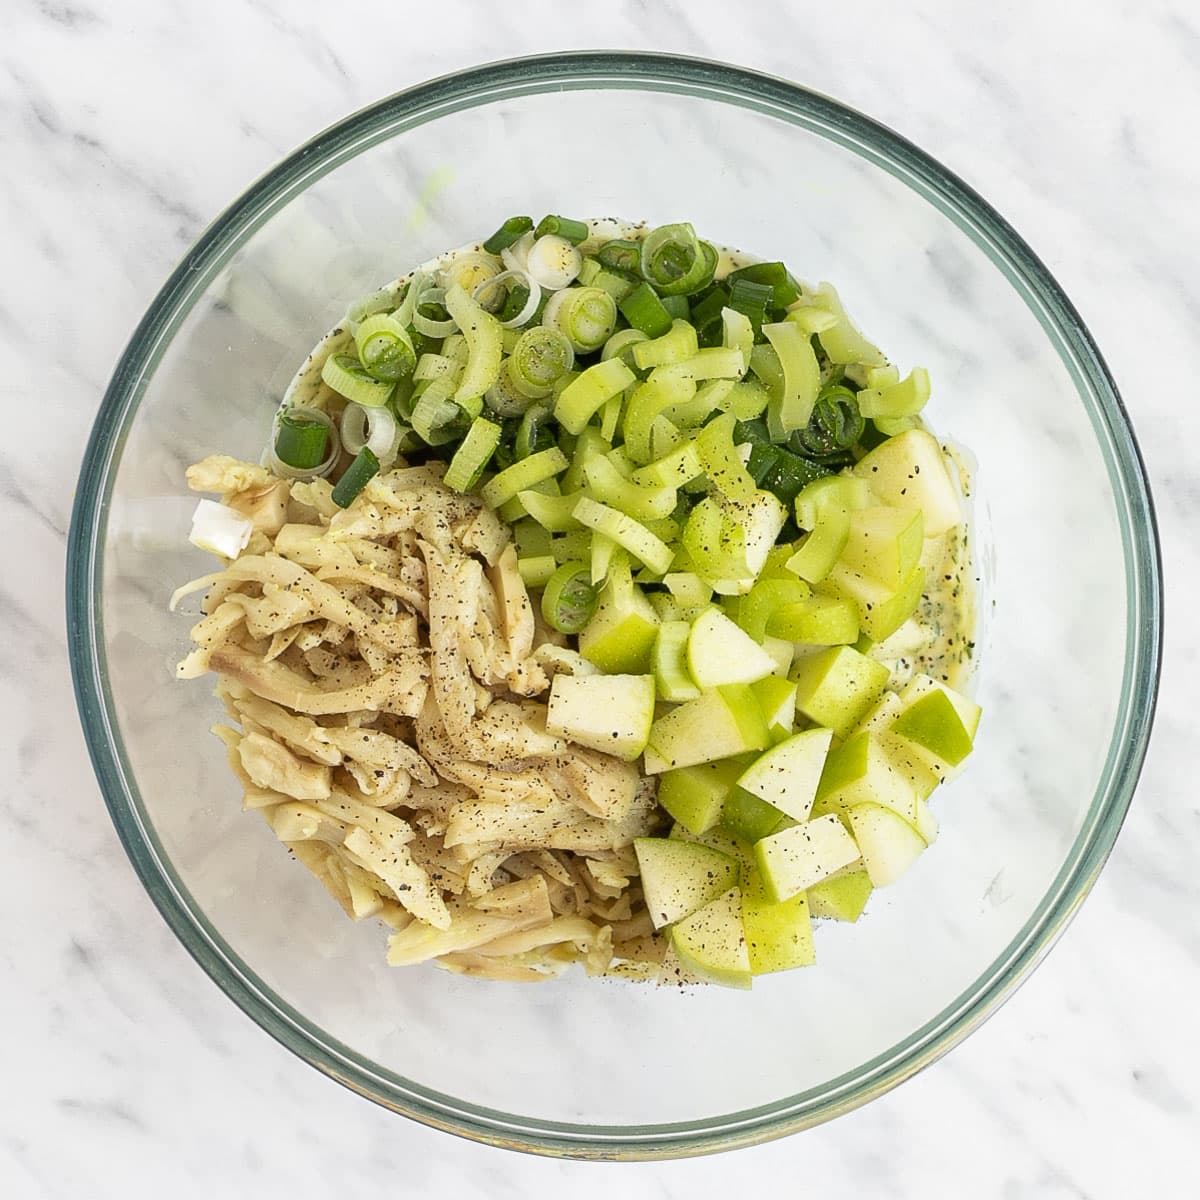 A glass bowl with chopped apples, celery, scallion, and shredded mushrooms